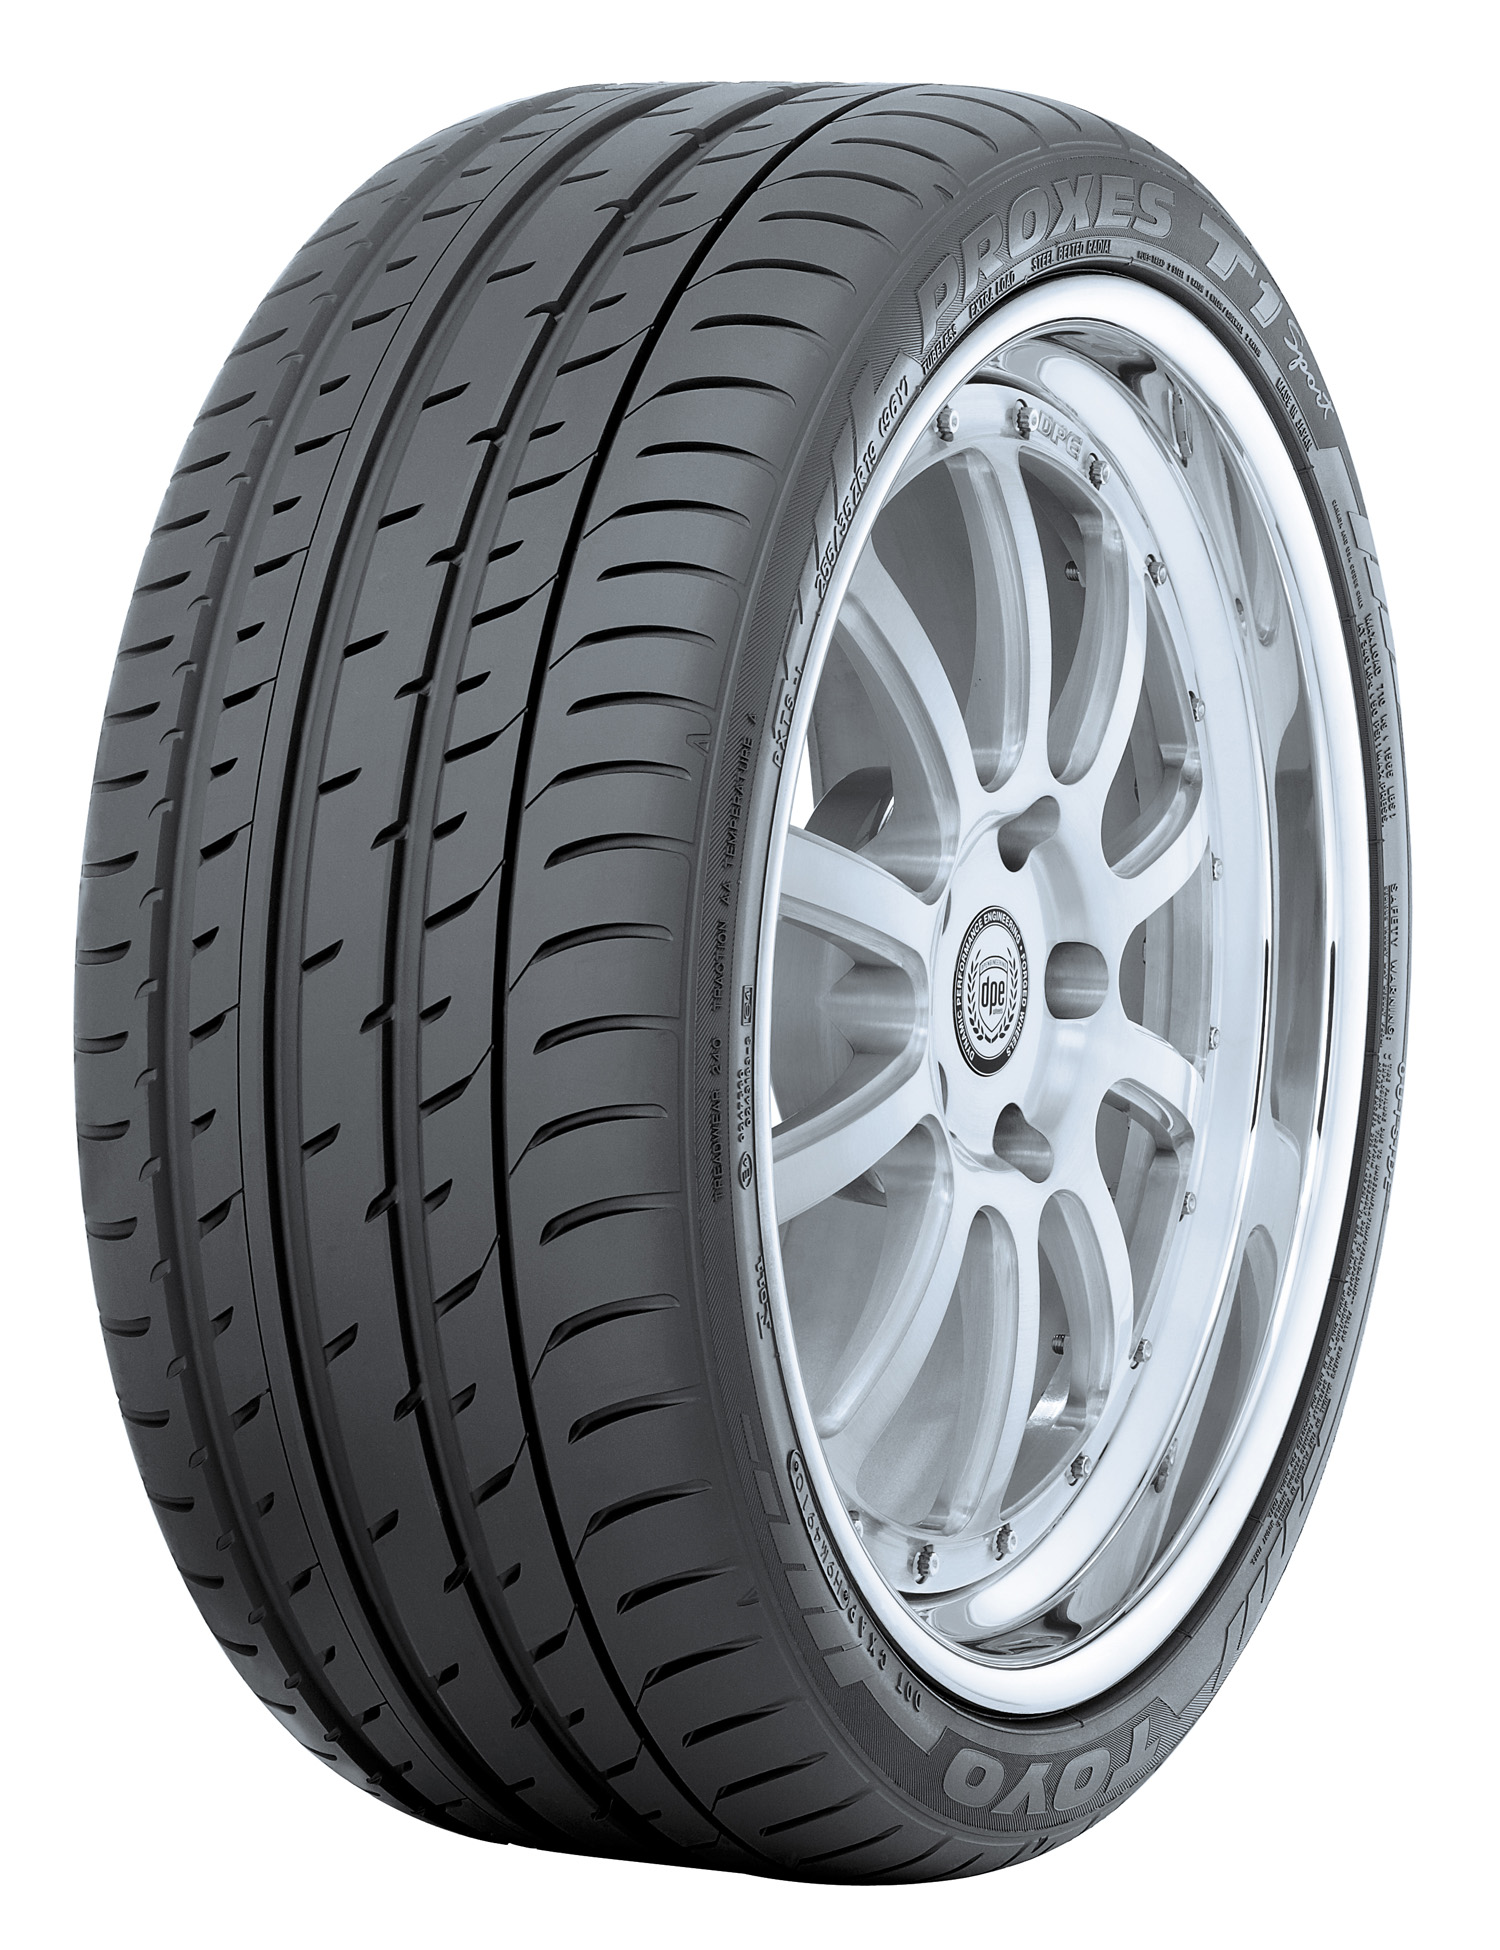 Download this Tire Images Sports Tires picture